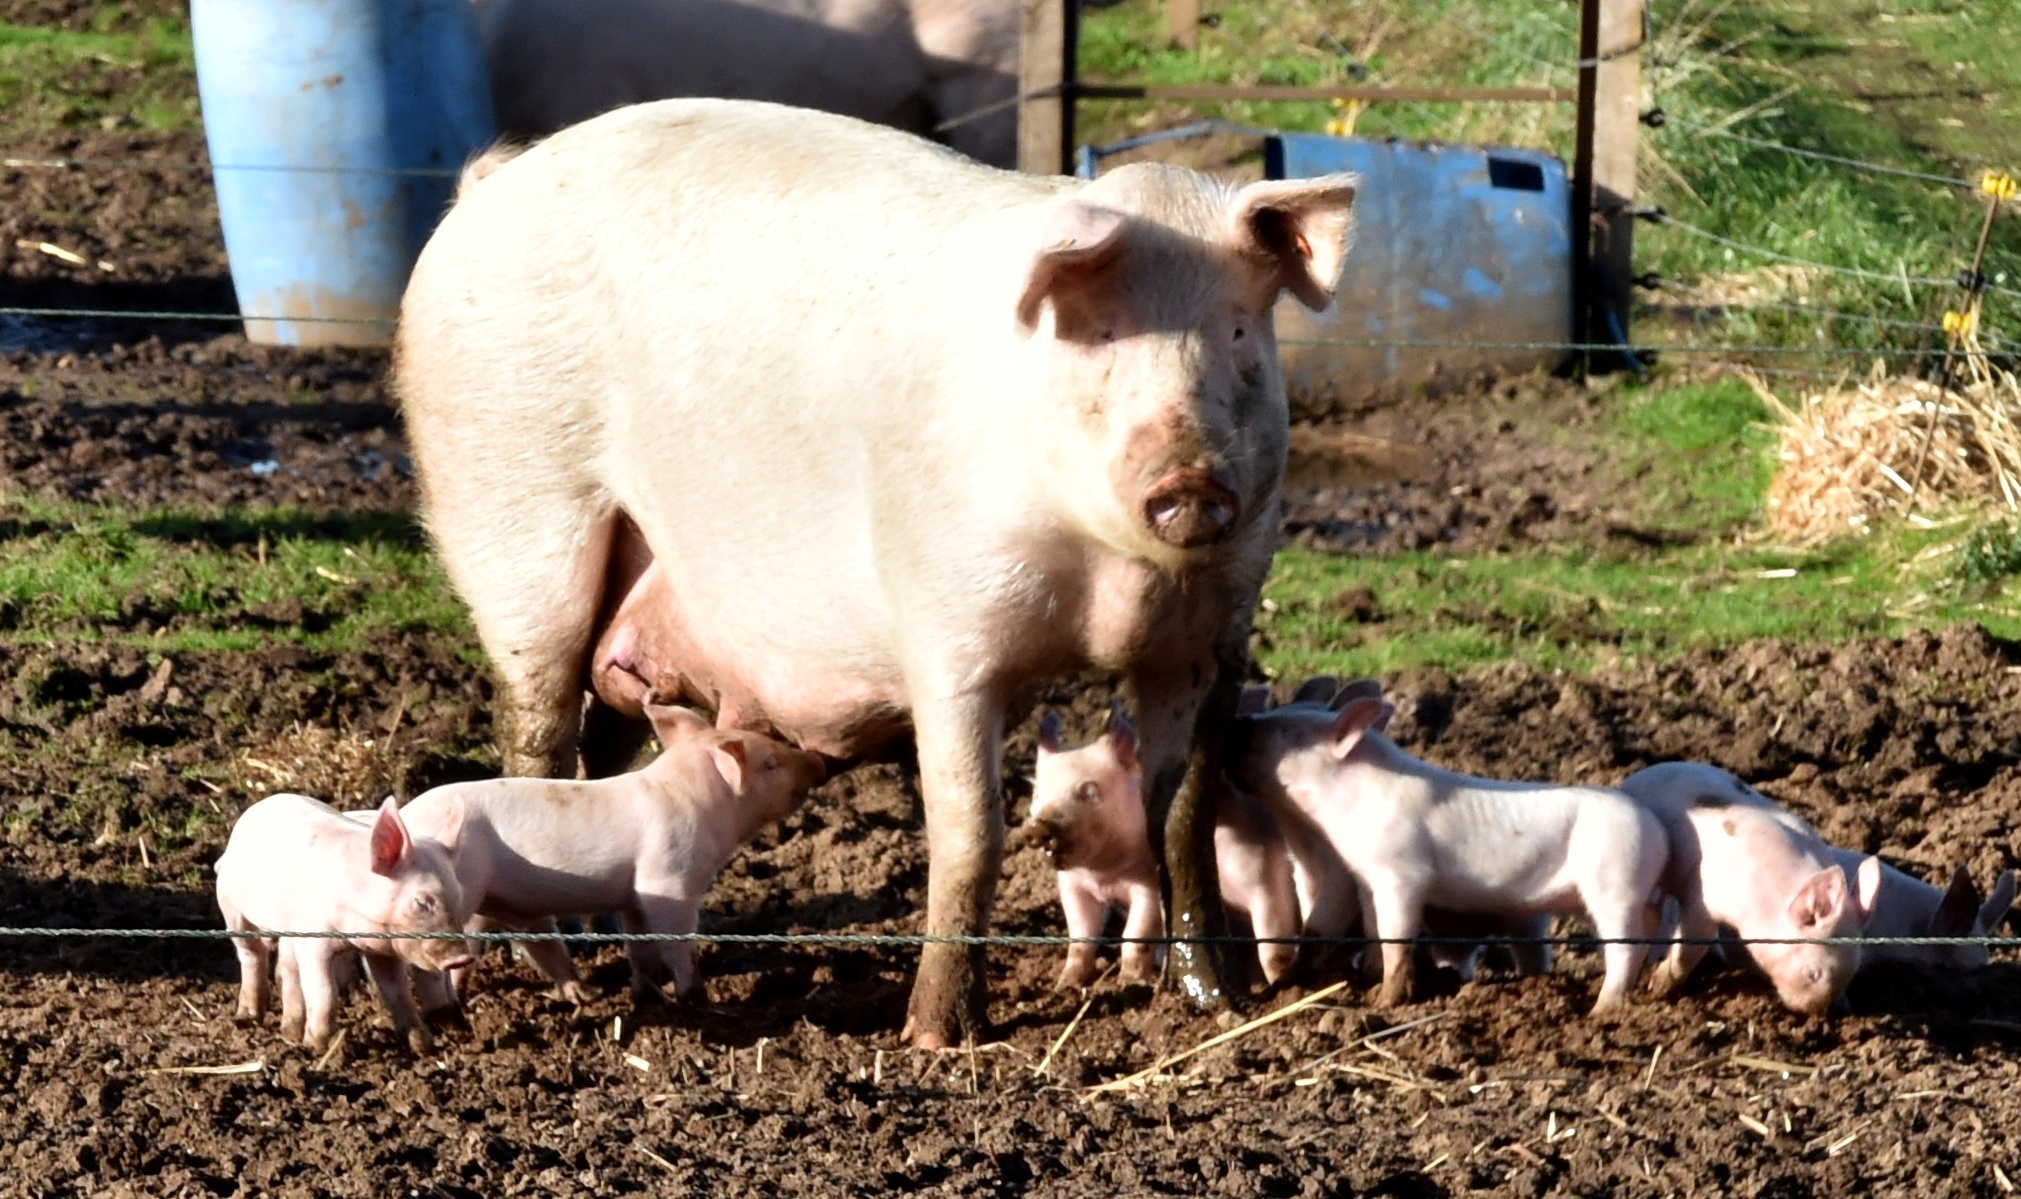 African swine fever outbreaks in Europe have been caused by wild boar or domestic pigs consuming contaminated pork